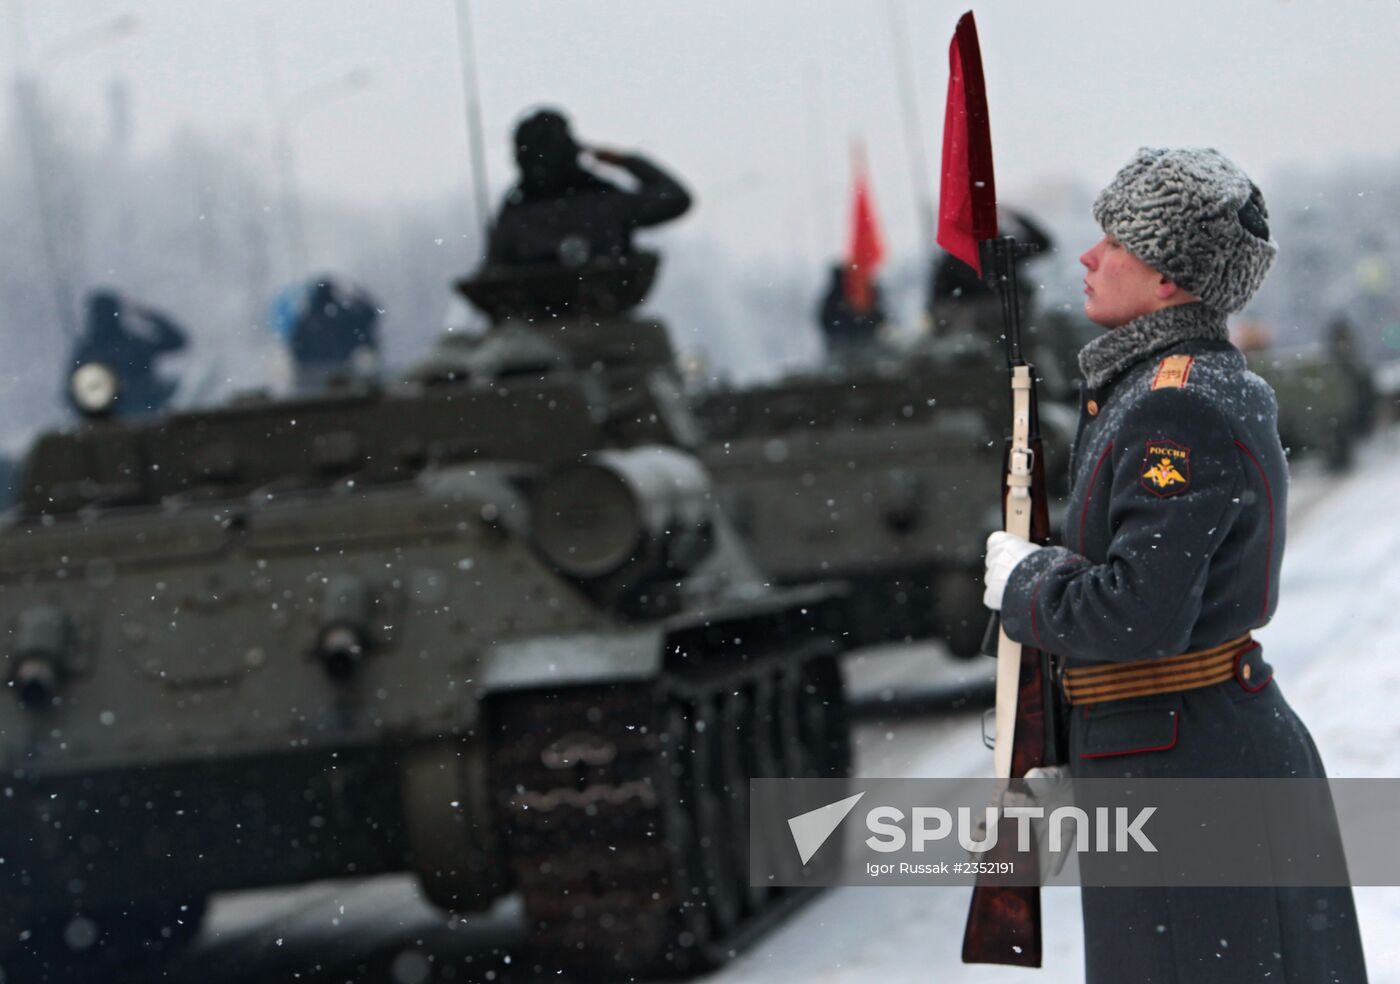 Final rehearsal of parade marking 70th anniversary of lifting of Siege of Leningrad